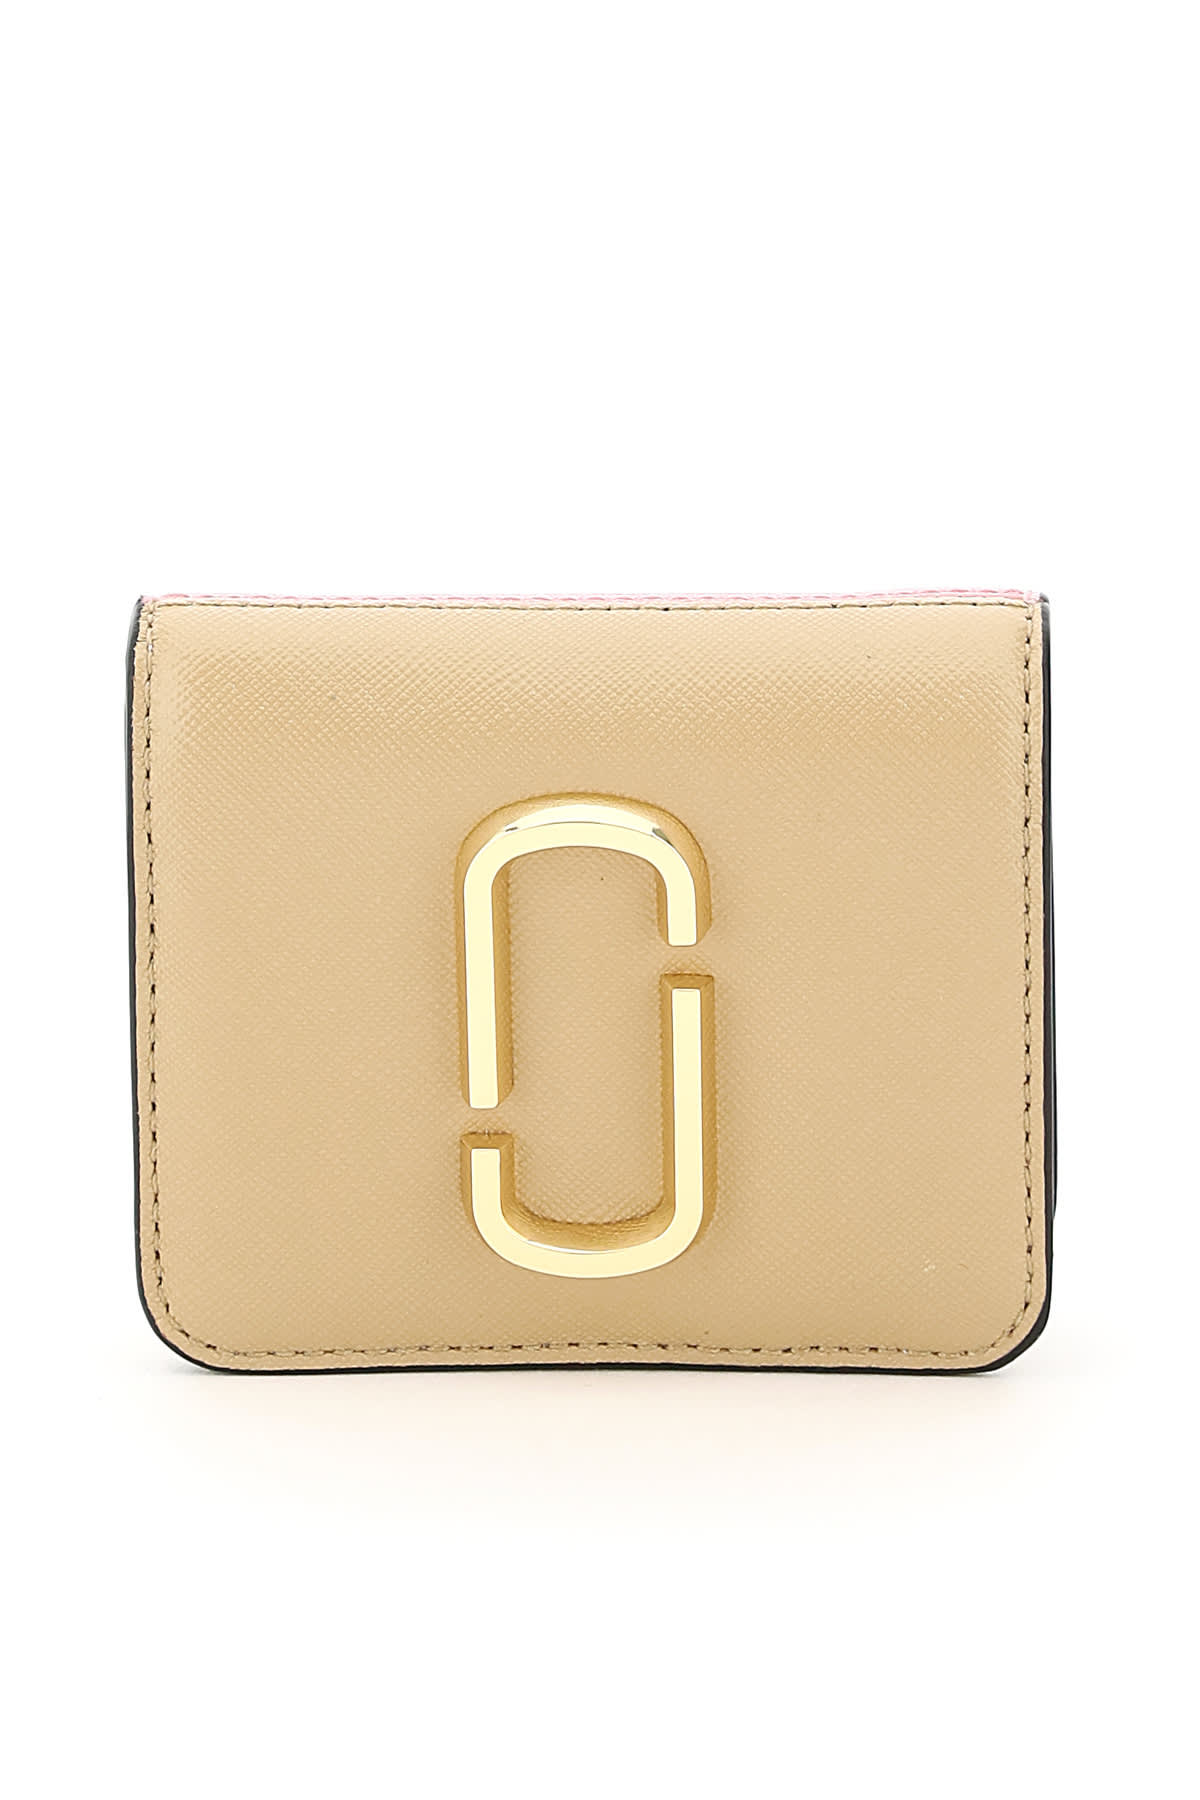 Marc Jacobs Snapshot Mini Wallet With Coin Pocket